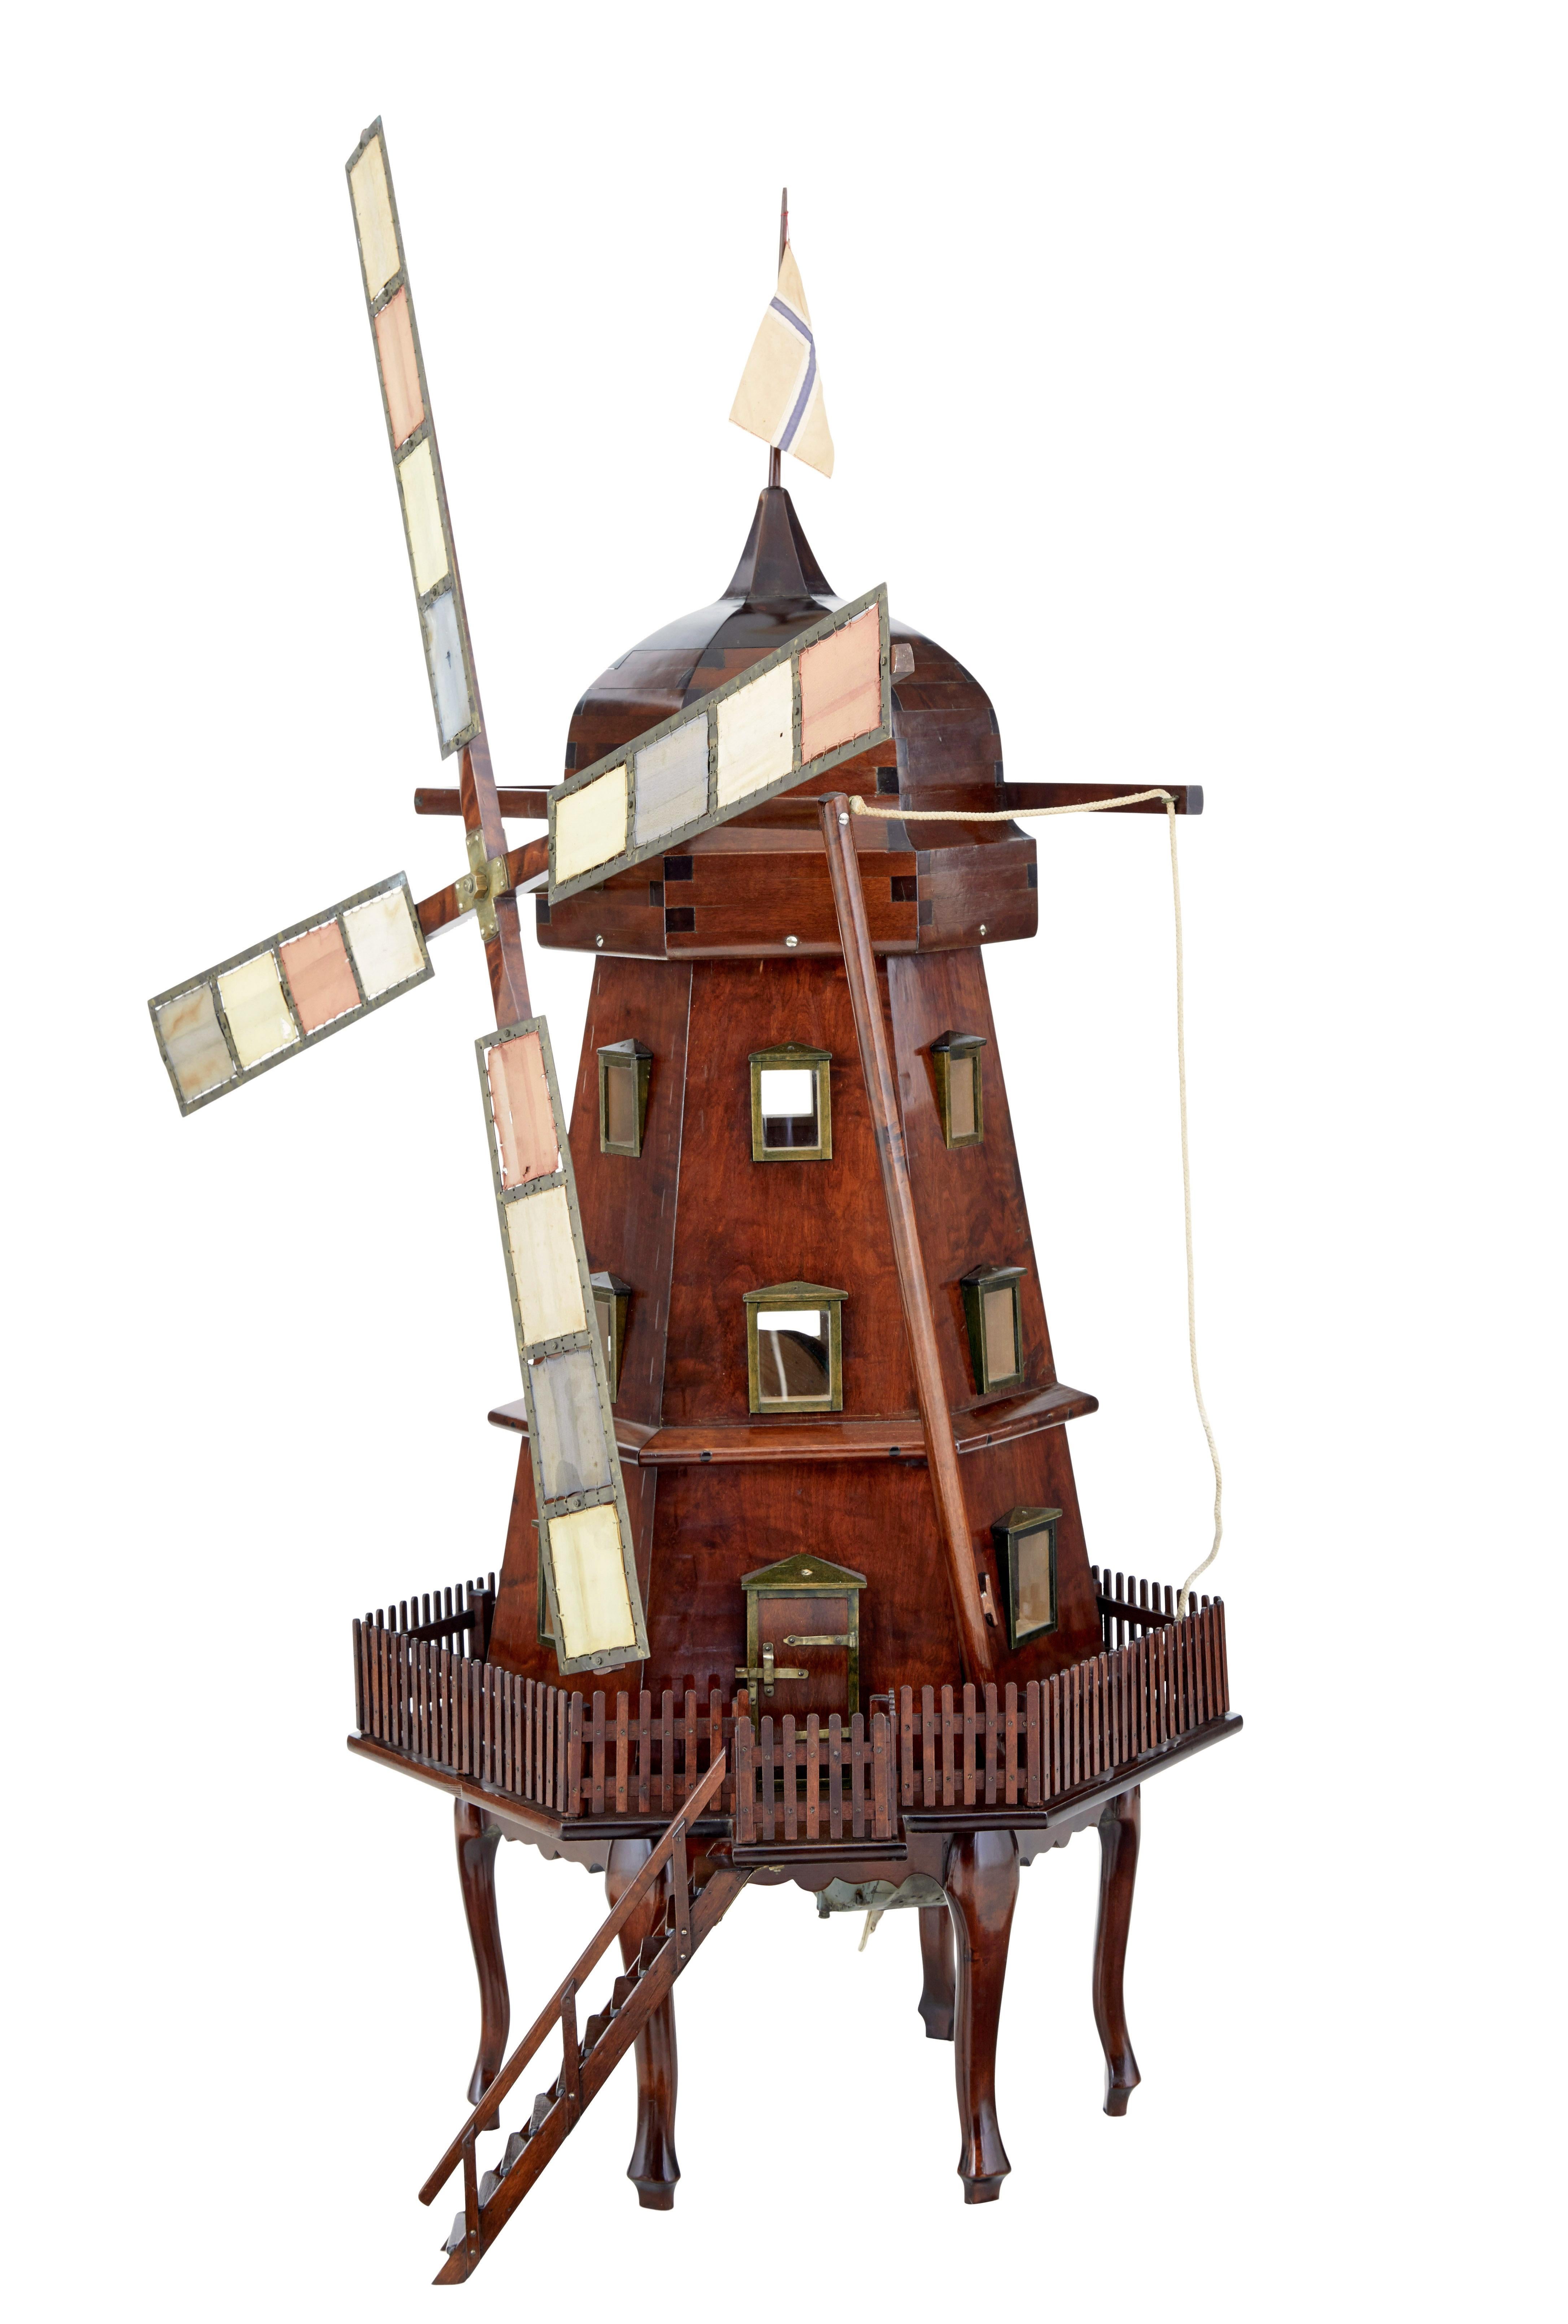 Early 20th century decorative dutch working windmill circa 1920.

We are pleased to offer this delightful scale model of a dutch windmill.  This could have only been commissioned for a museum or a private collection, due to the quality and care that